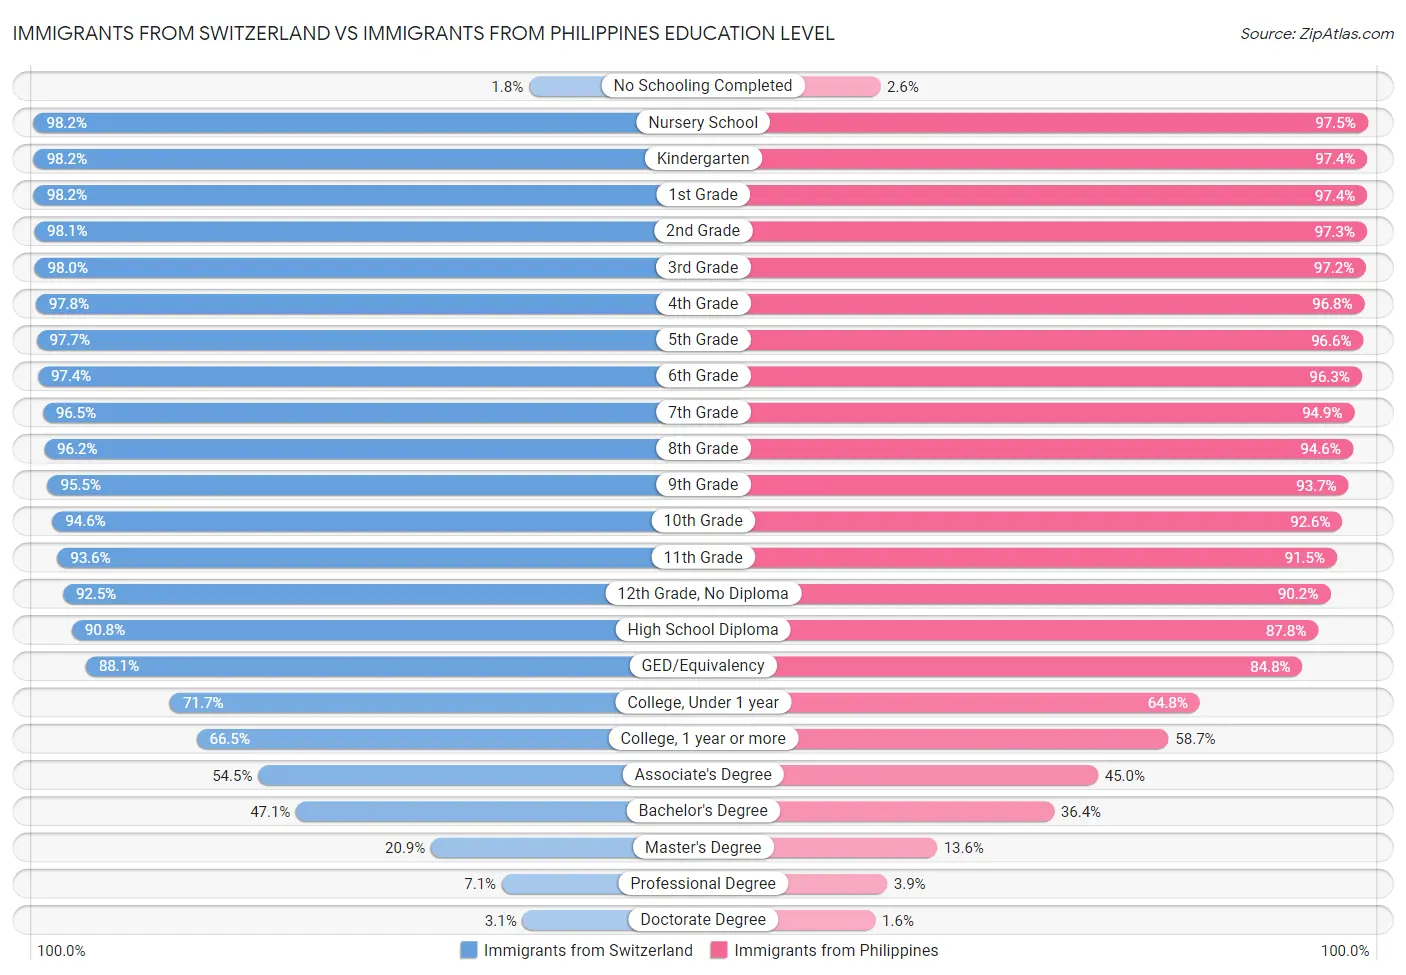 Immigrants from Switzerland vs Immigrants from Philippines Education Level